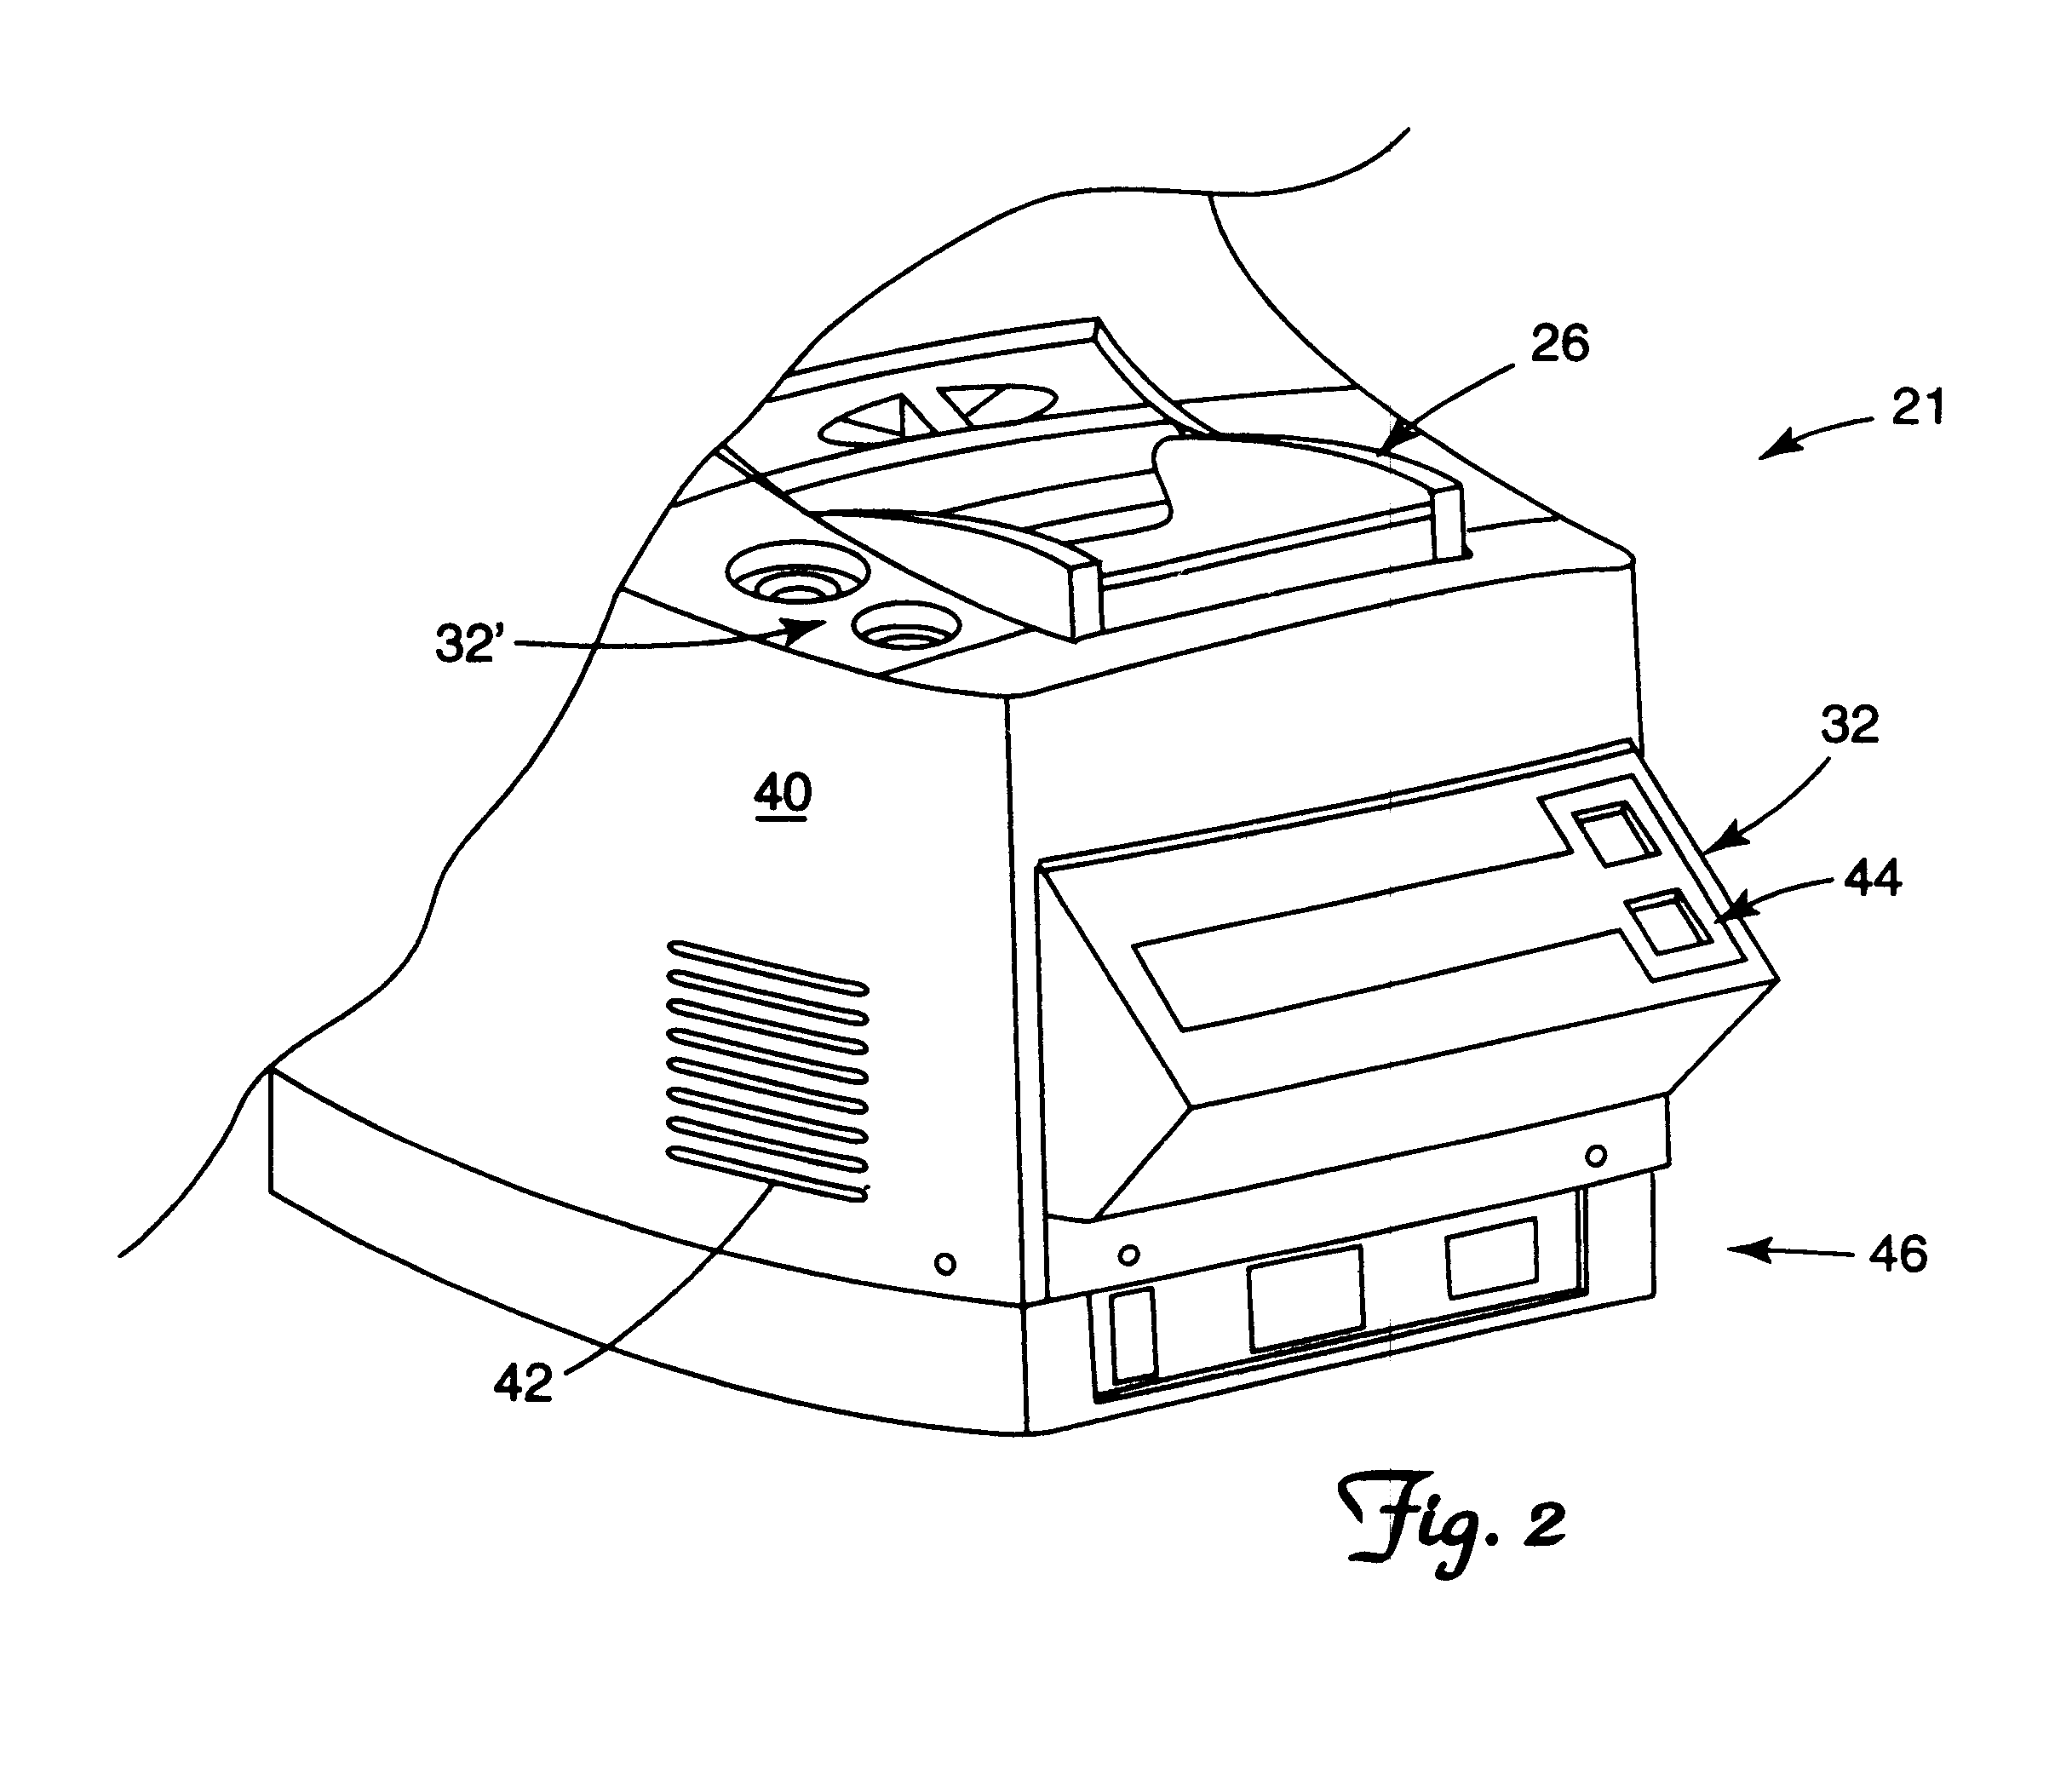 Device and method for continuously shuffling and monitoring cards